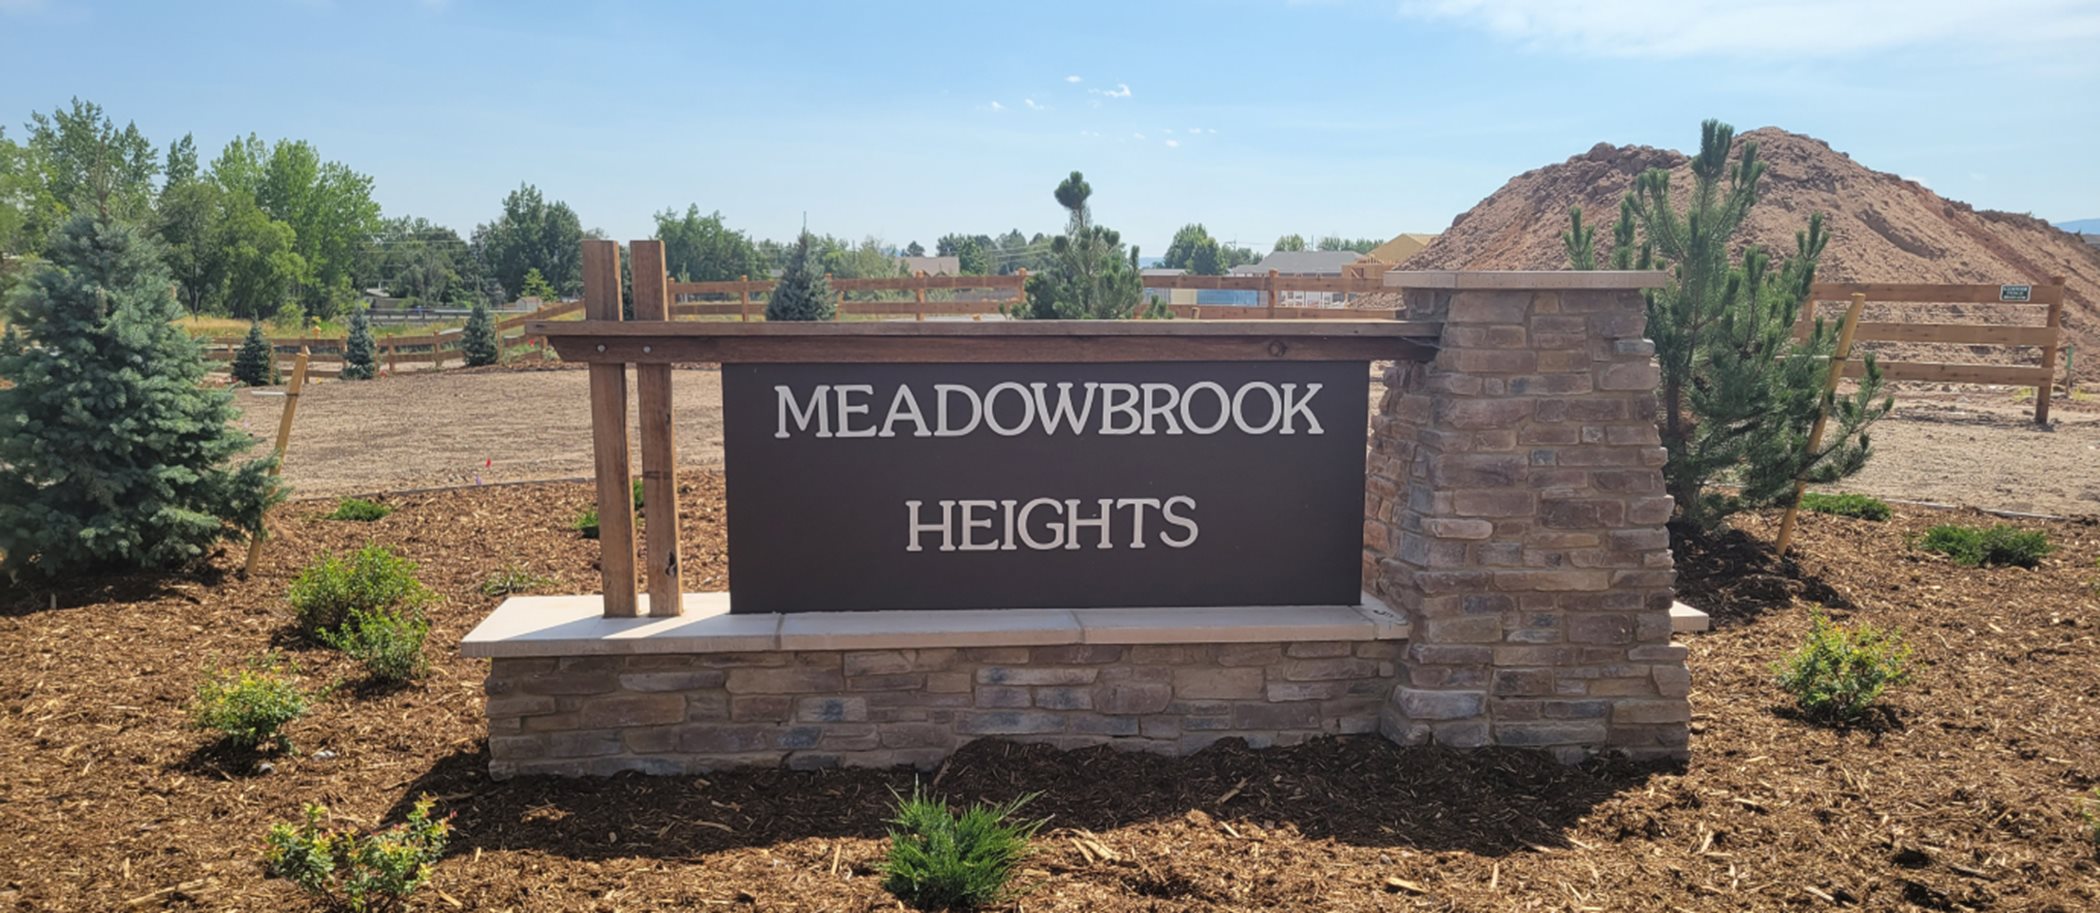 Meadowbrook Heights Monarch monument